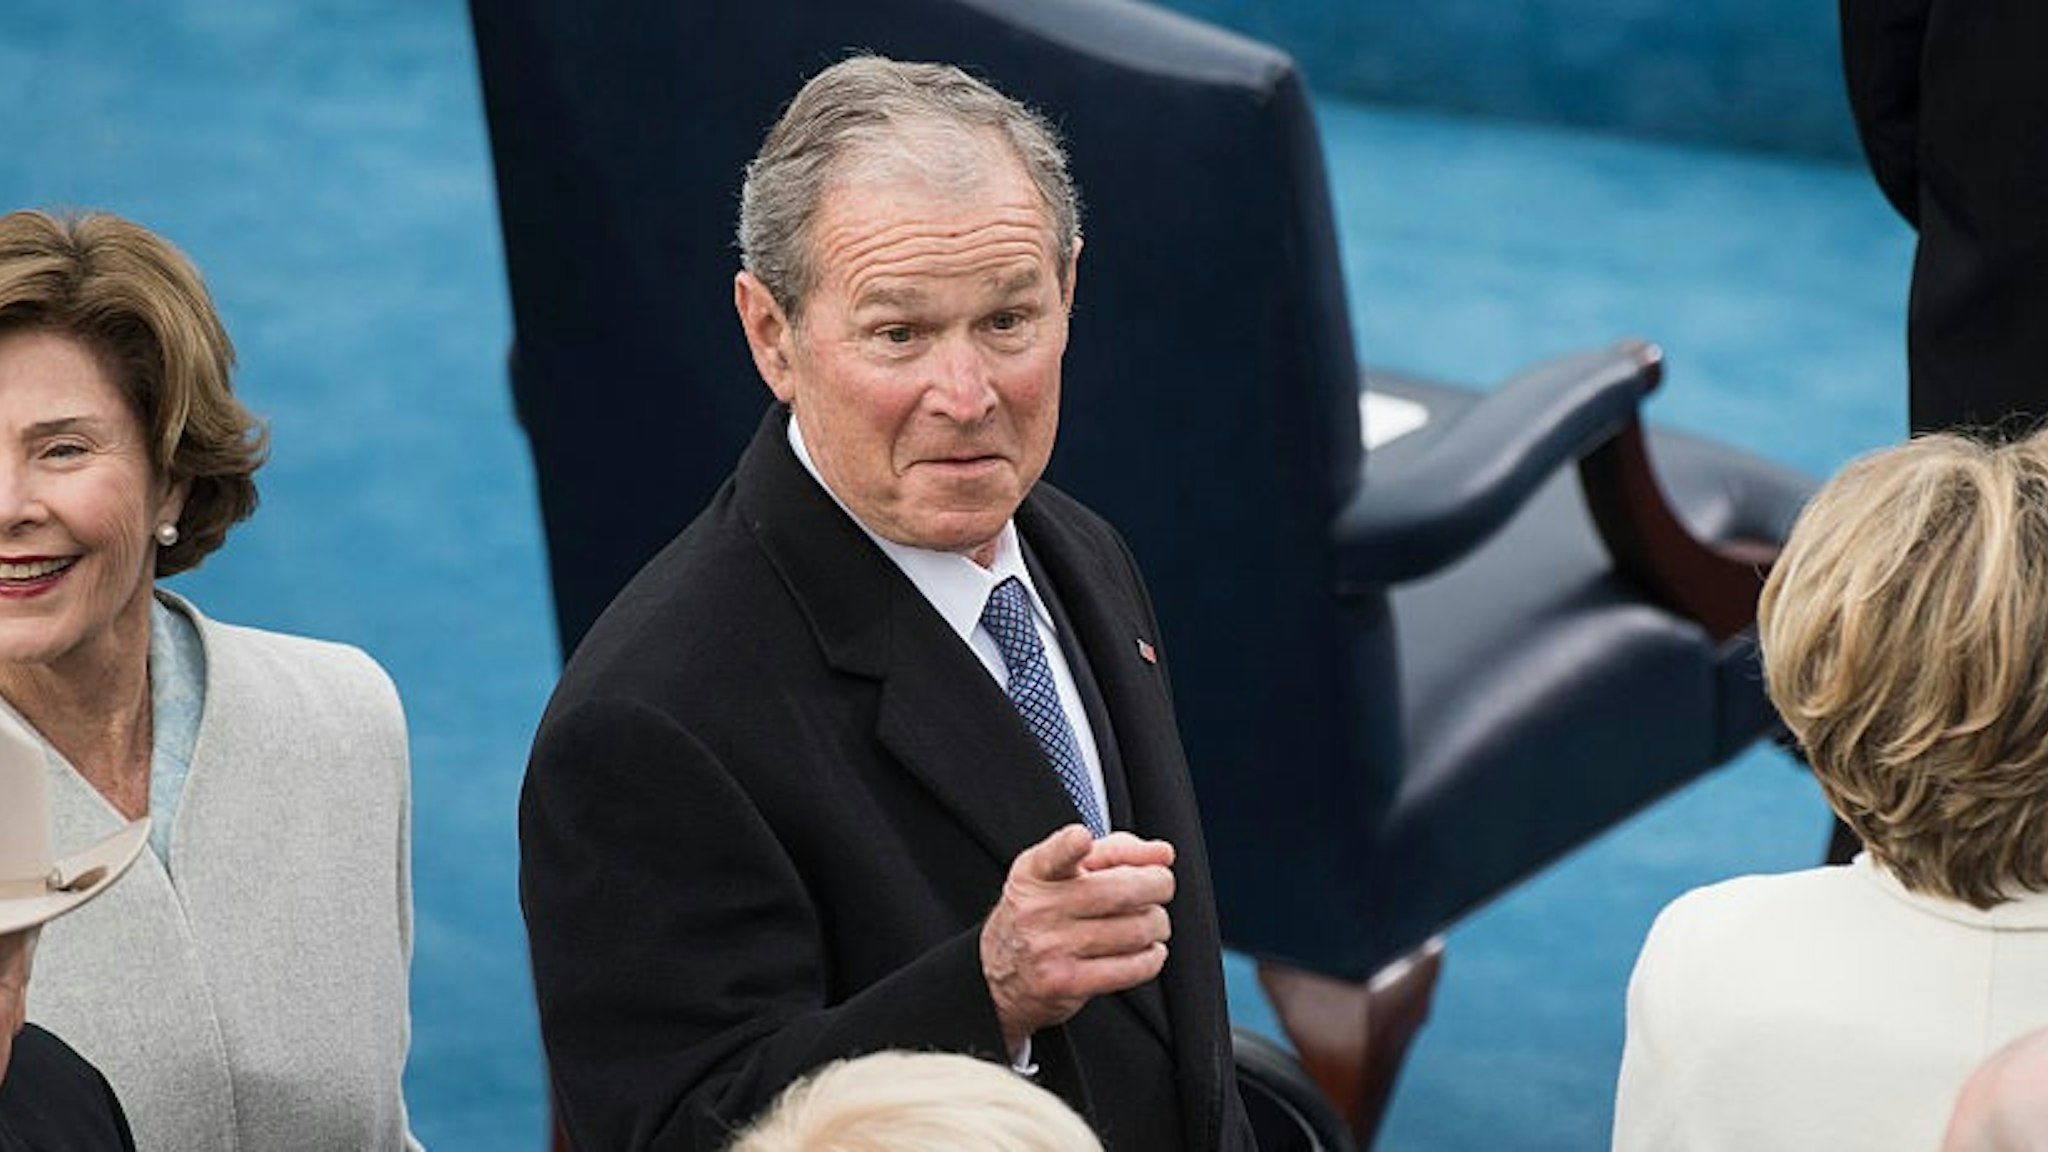 UNITED STATES - JANUARY 20: Former President George W. Bush, former first Lady Laura Bush, left, and Secretary Hillary Clinton, right are seen on the West Front of the Capitol before President Donald J. Trump was sworn in as the 45th President of the United States, January 20, 2017. Former Vice President Dick Cheney, left, and his wife Lynne, also appear. (Photo By T